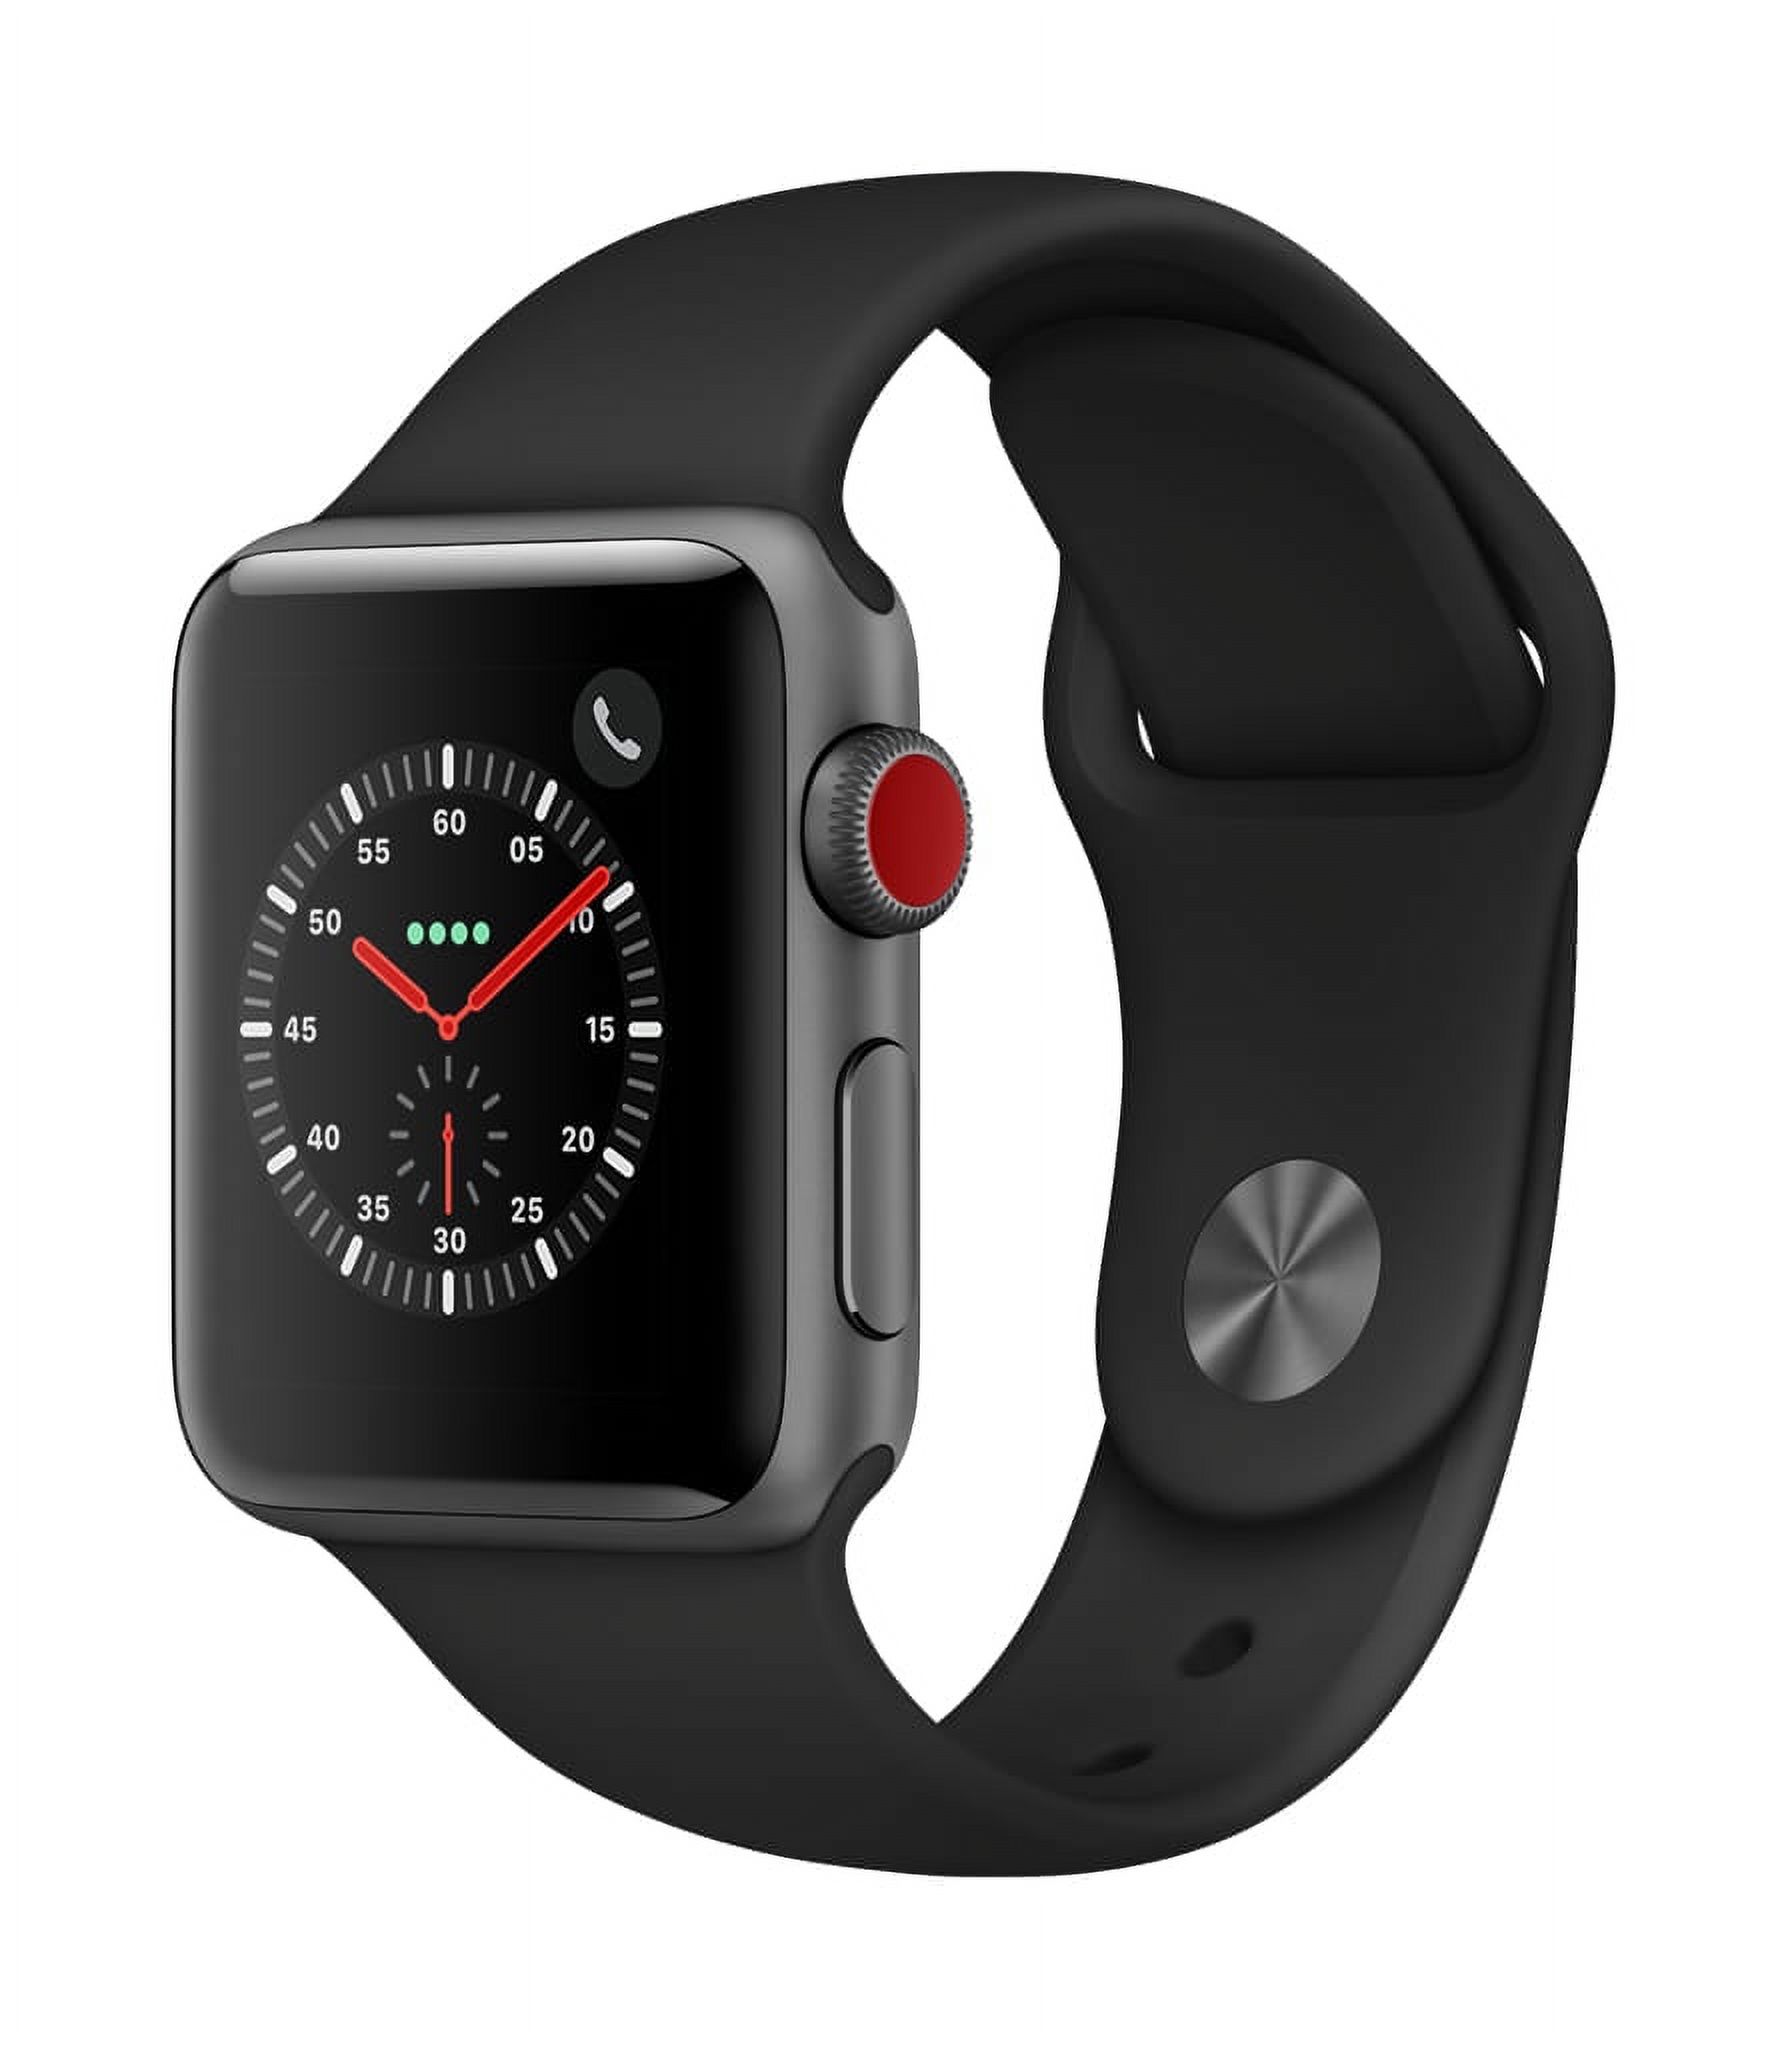 Apple Watch Series 3 GPS + Cellular - 38mm - Sport Band - Aluminum Case -Space Gray/Black - image 1 of 2